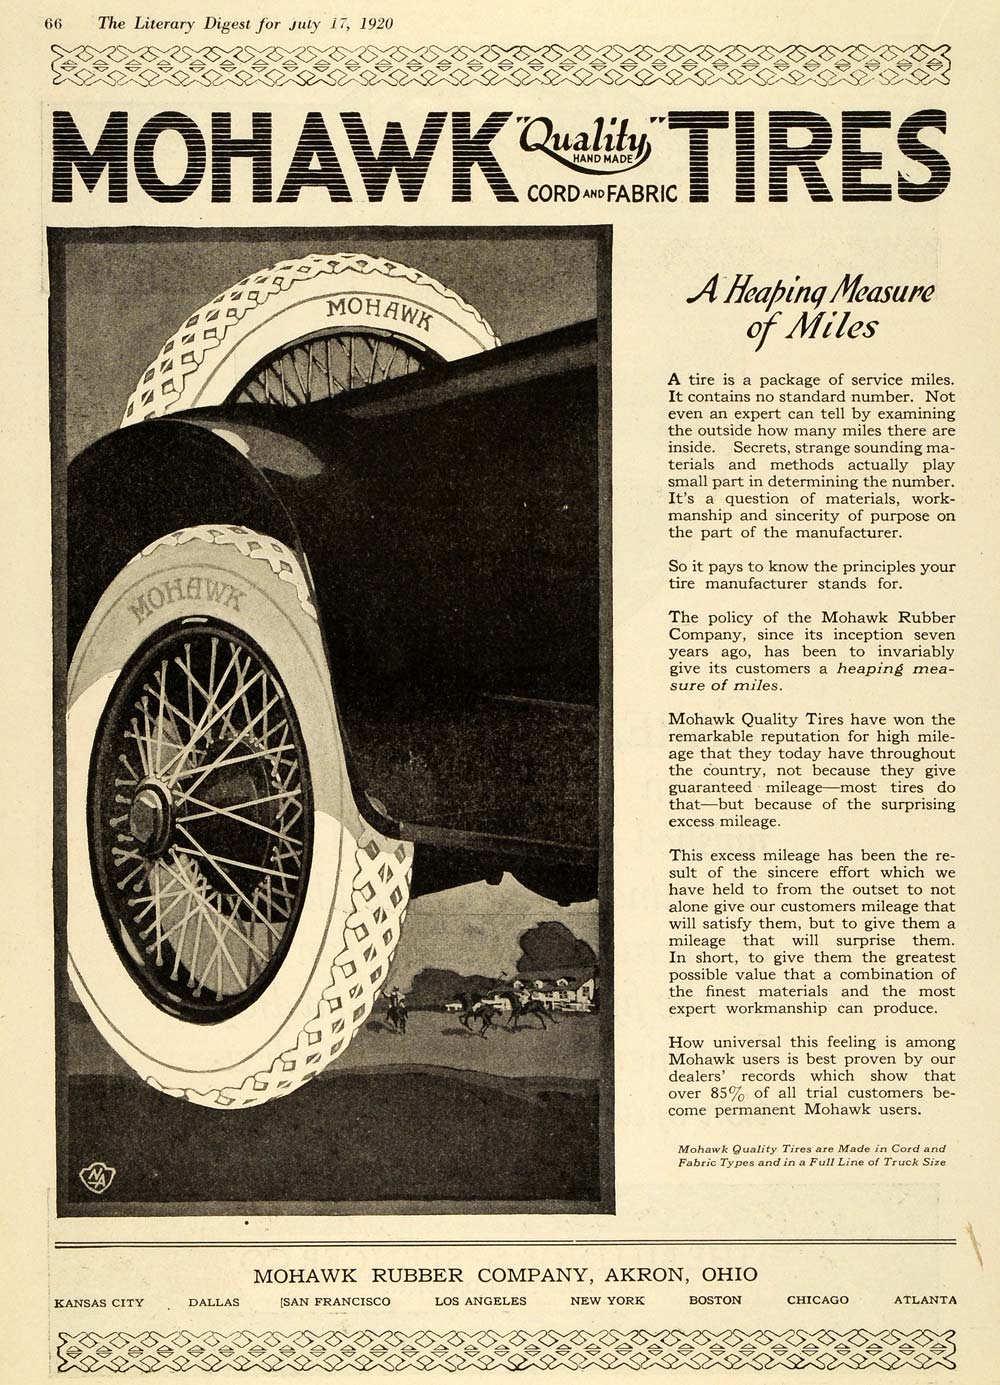 Cars – Tagged Vintage Advertising Art – Page 64 – Period Paper